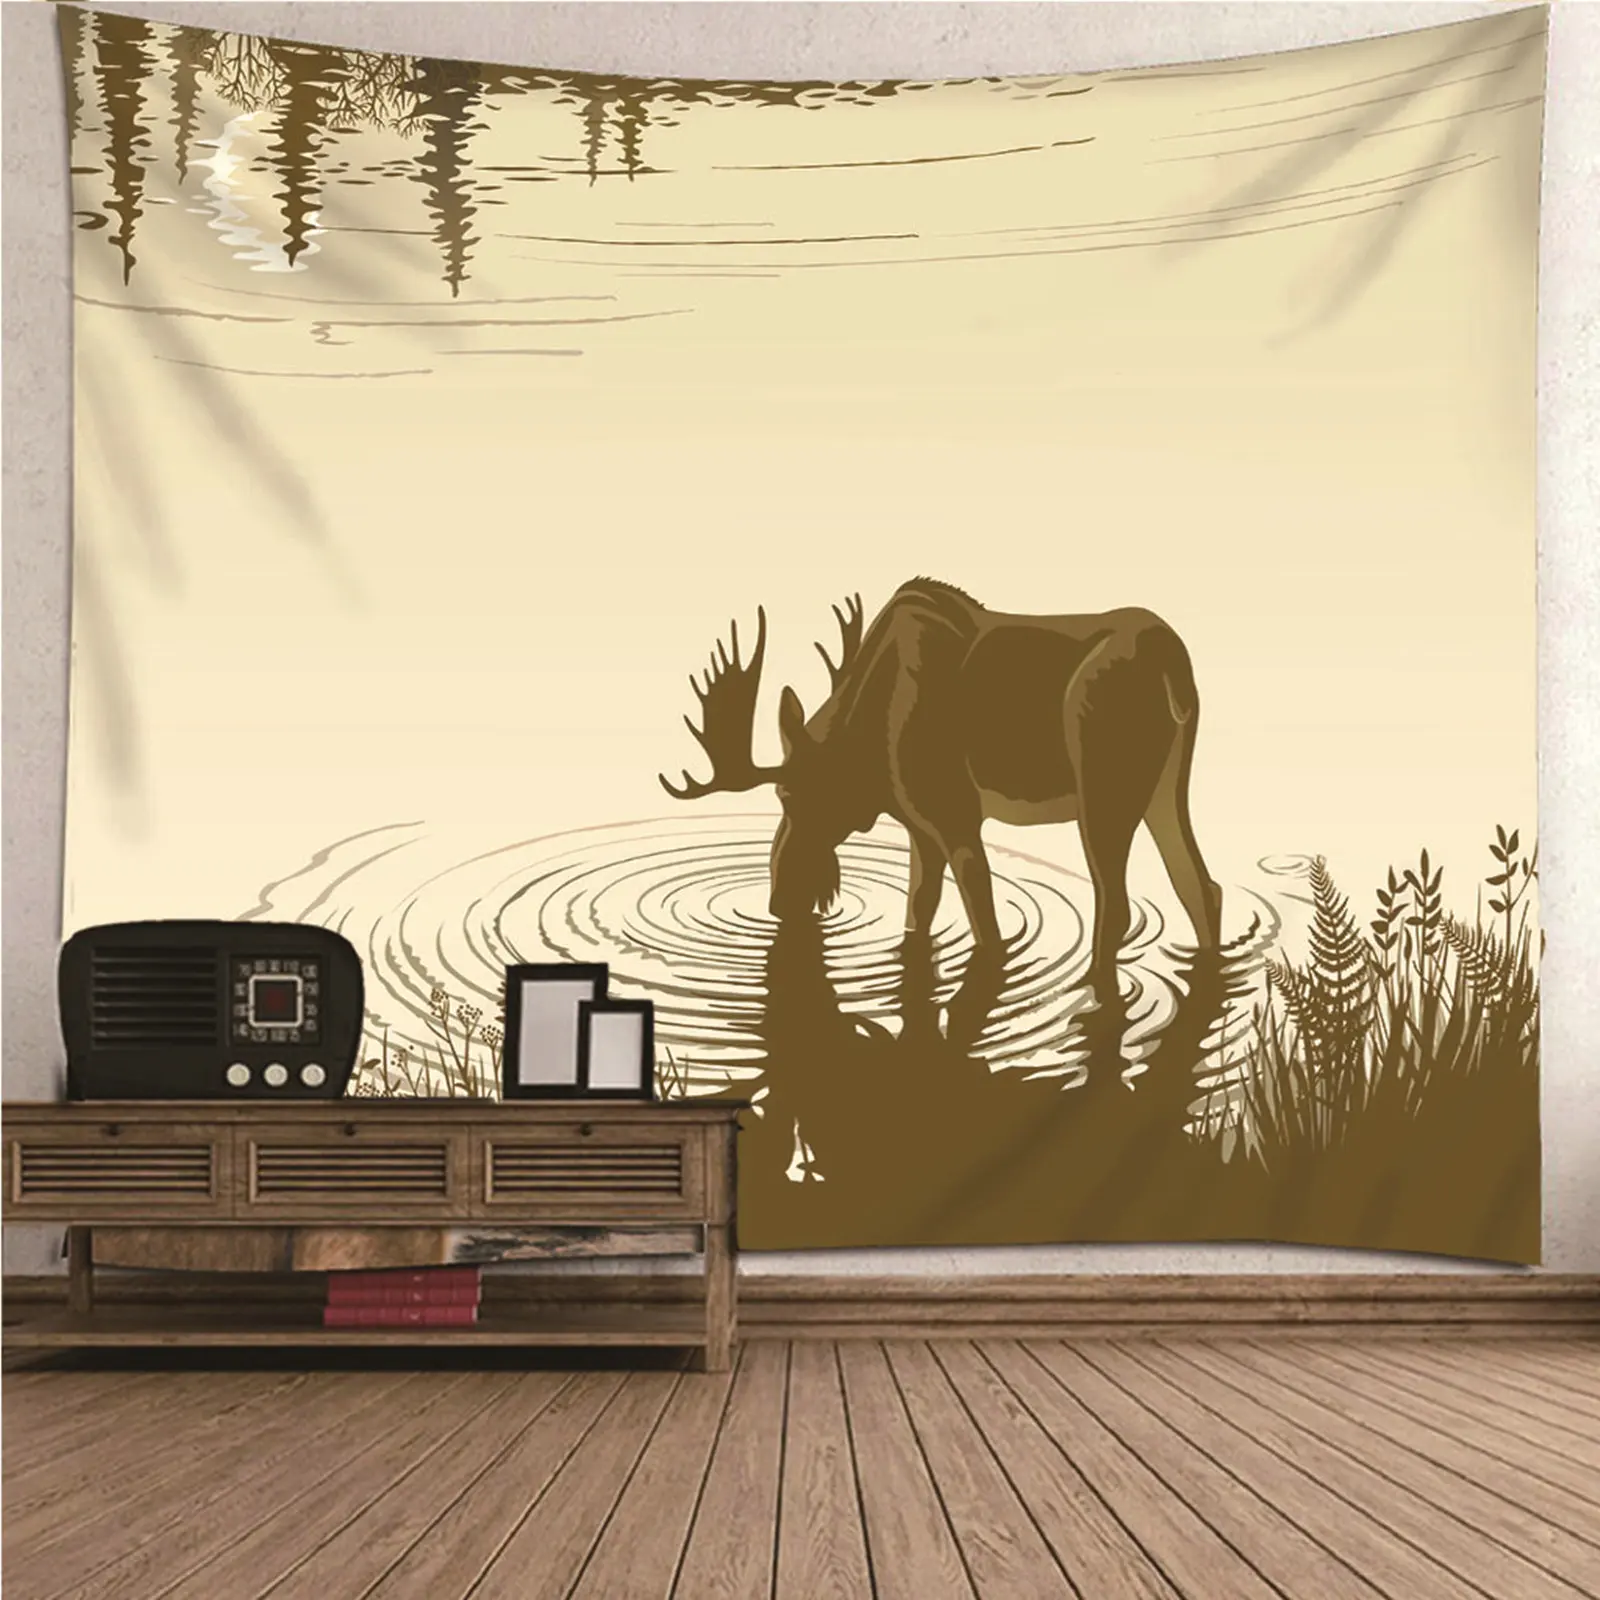 

Tapestry Simple Home Decor Accents Living Room Nature animal Animal Theme Elk Drinking Water Wall Hanging Blanket Dorm Art Decor